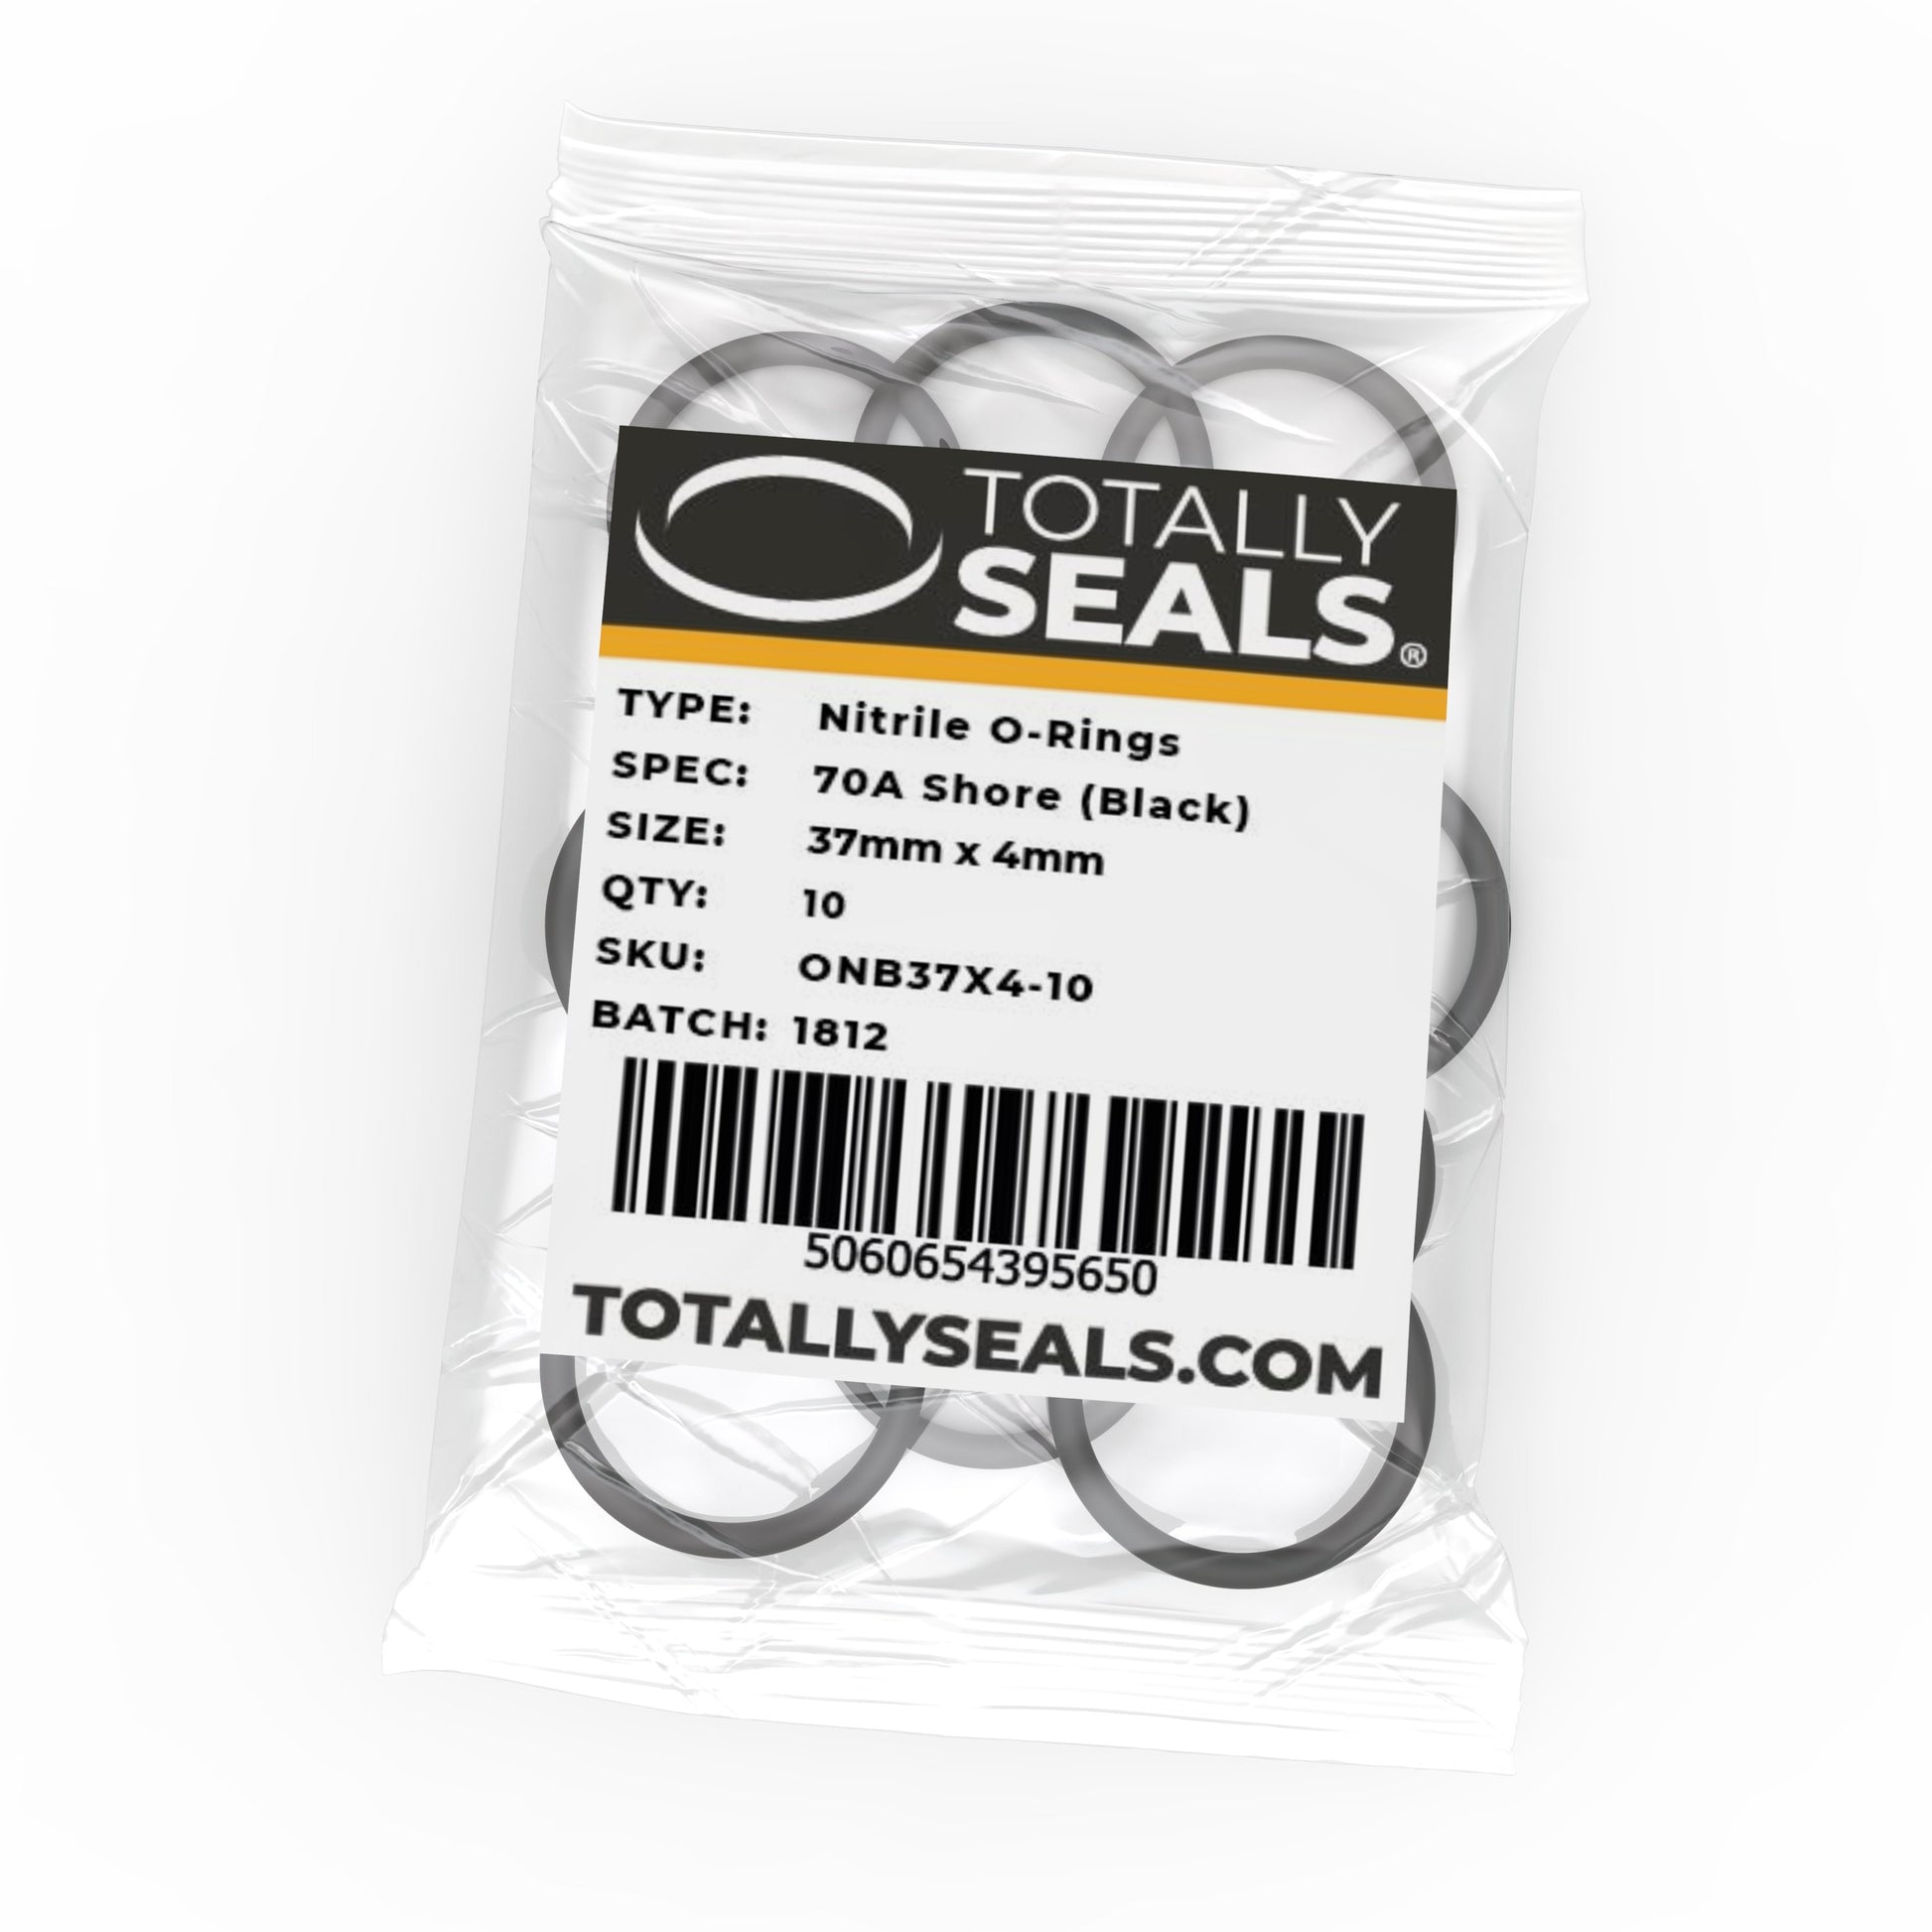 37mm x 4mm (45mm OD) Nitrile O-Rings - Totally Seals®